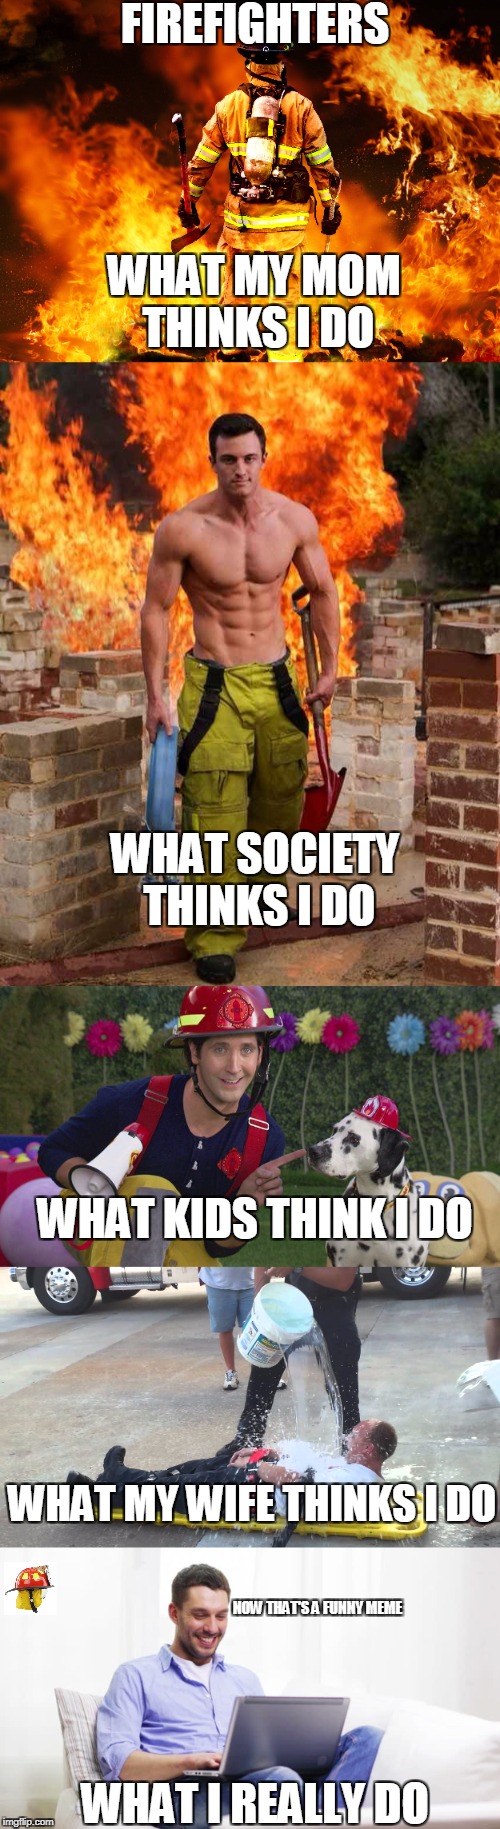 Your worst day is my every day | FIREFIGHTERS; WHAT MY MOM THINKS I DO; WHAT SOCIETY THINKS I DO; WHAT KIDS THINK I DO; WHAT MY WIFE THINKS I DO; NOW THAT'S A FUNNY MEME; WHAT I REALLY DO | image tagged in funny meme,meme,firefighter | made w/ Imgflip meme maker